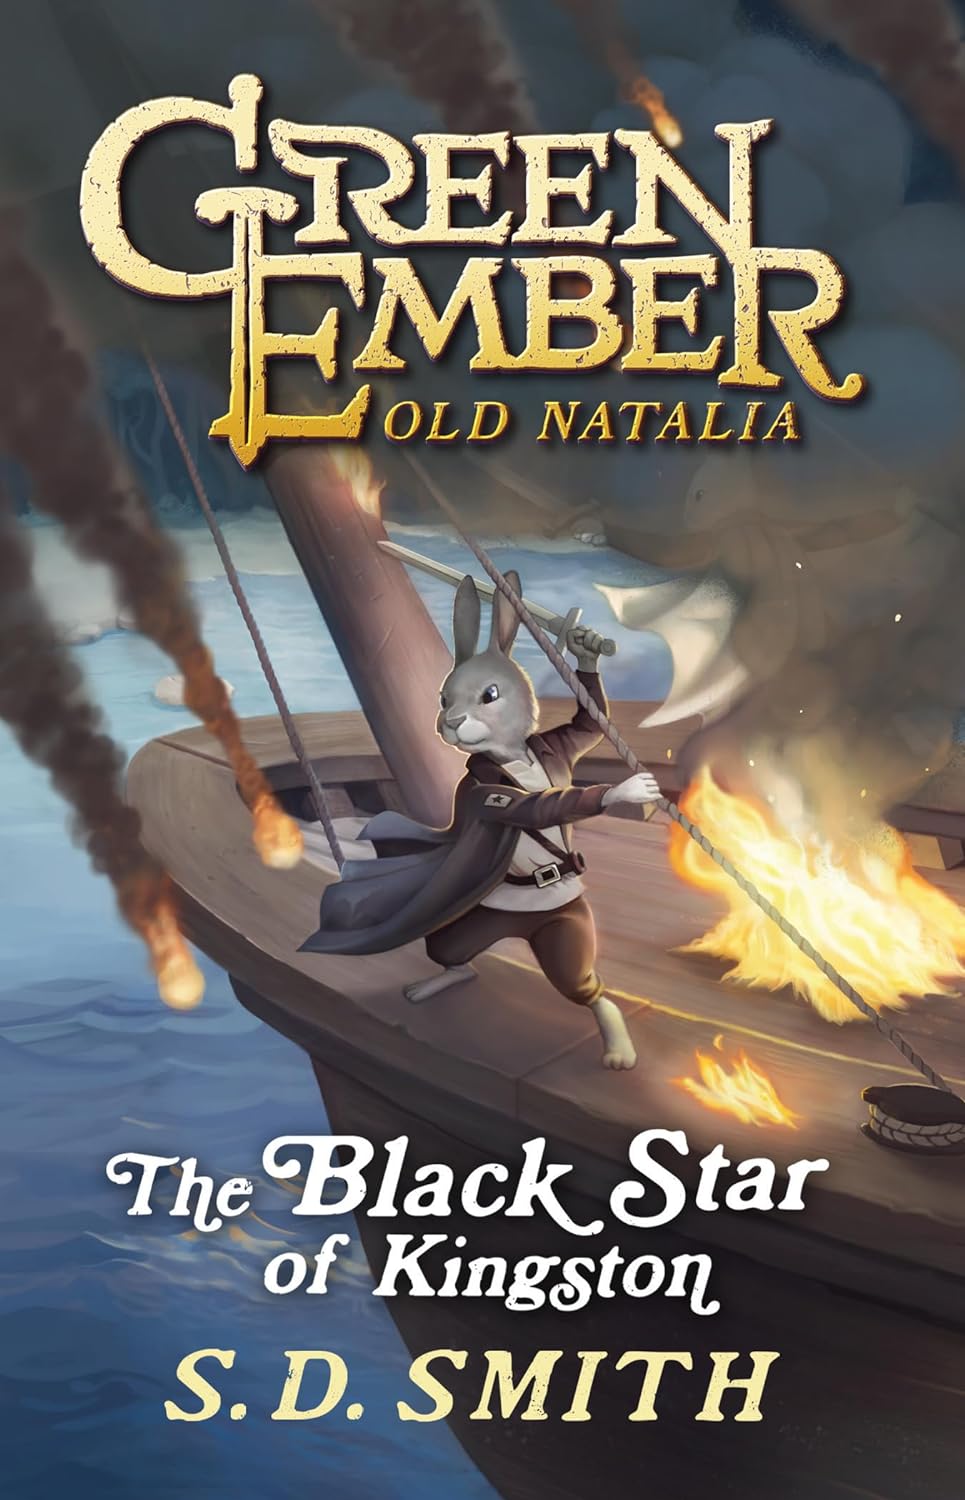 The Black Star of Kingston: Tales of Old Natalia 1 | The Green